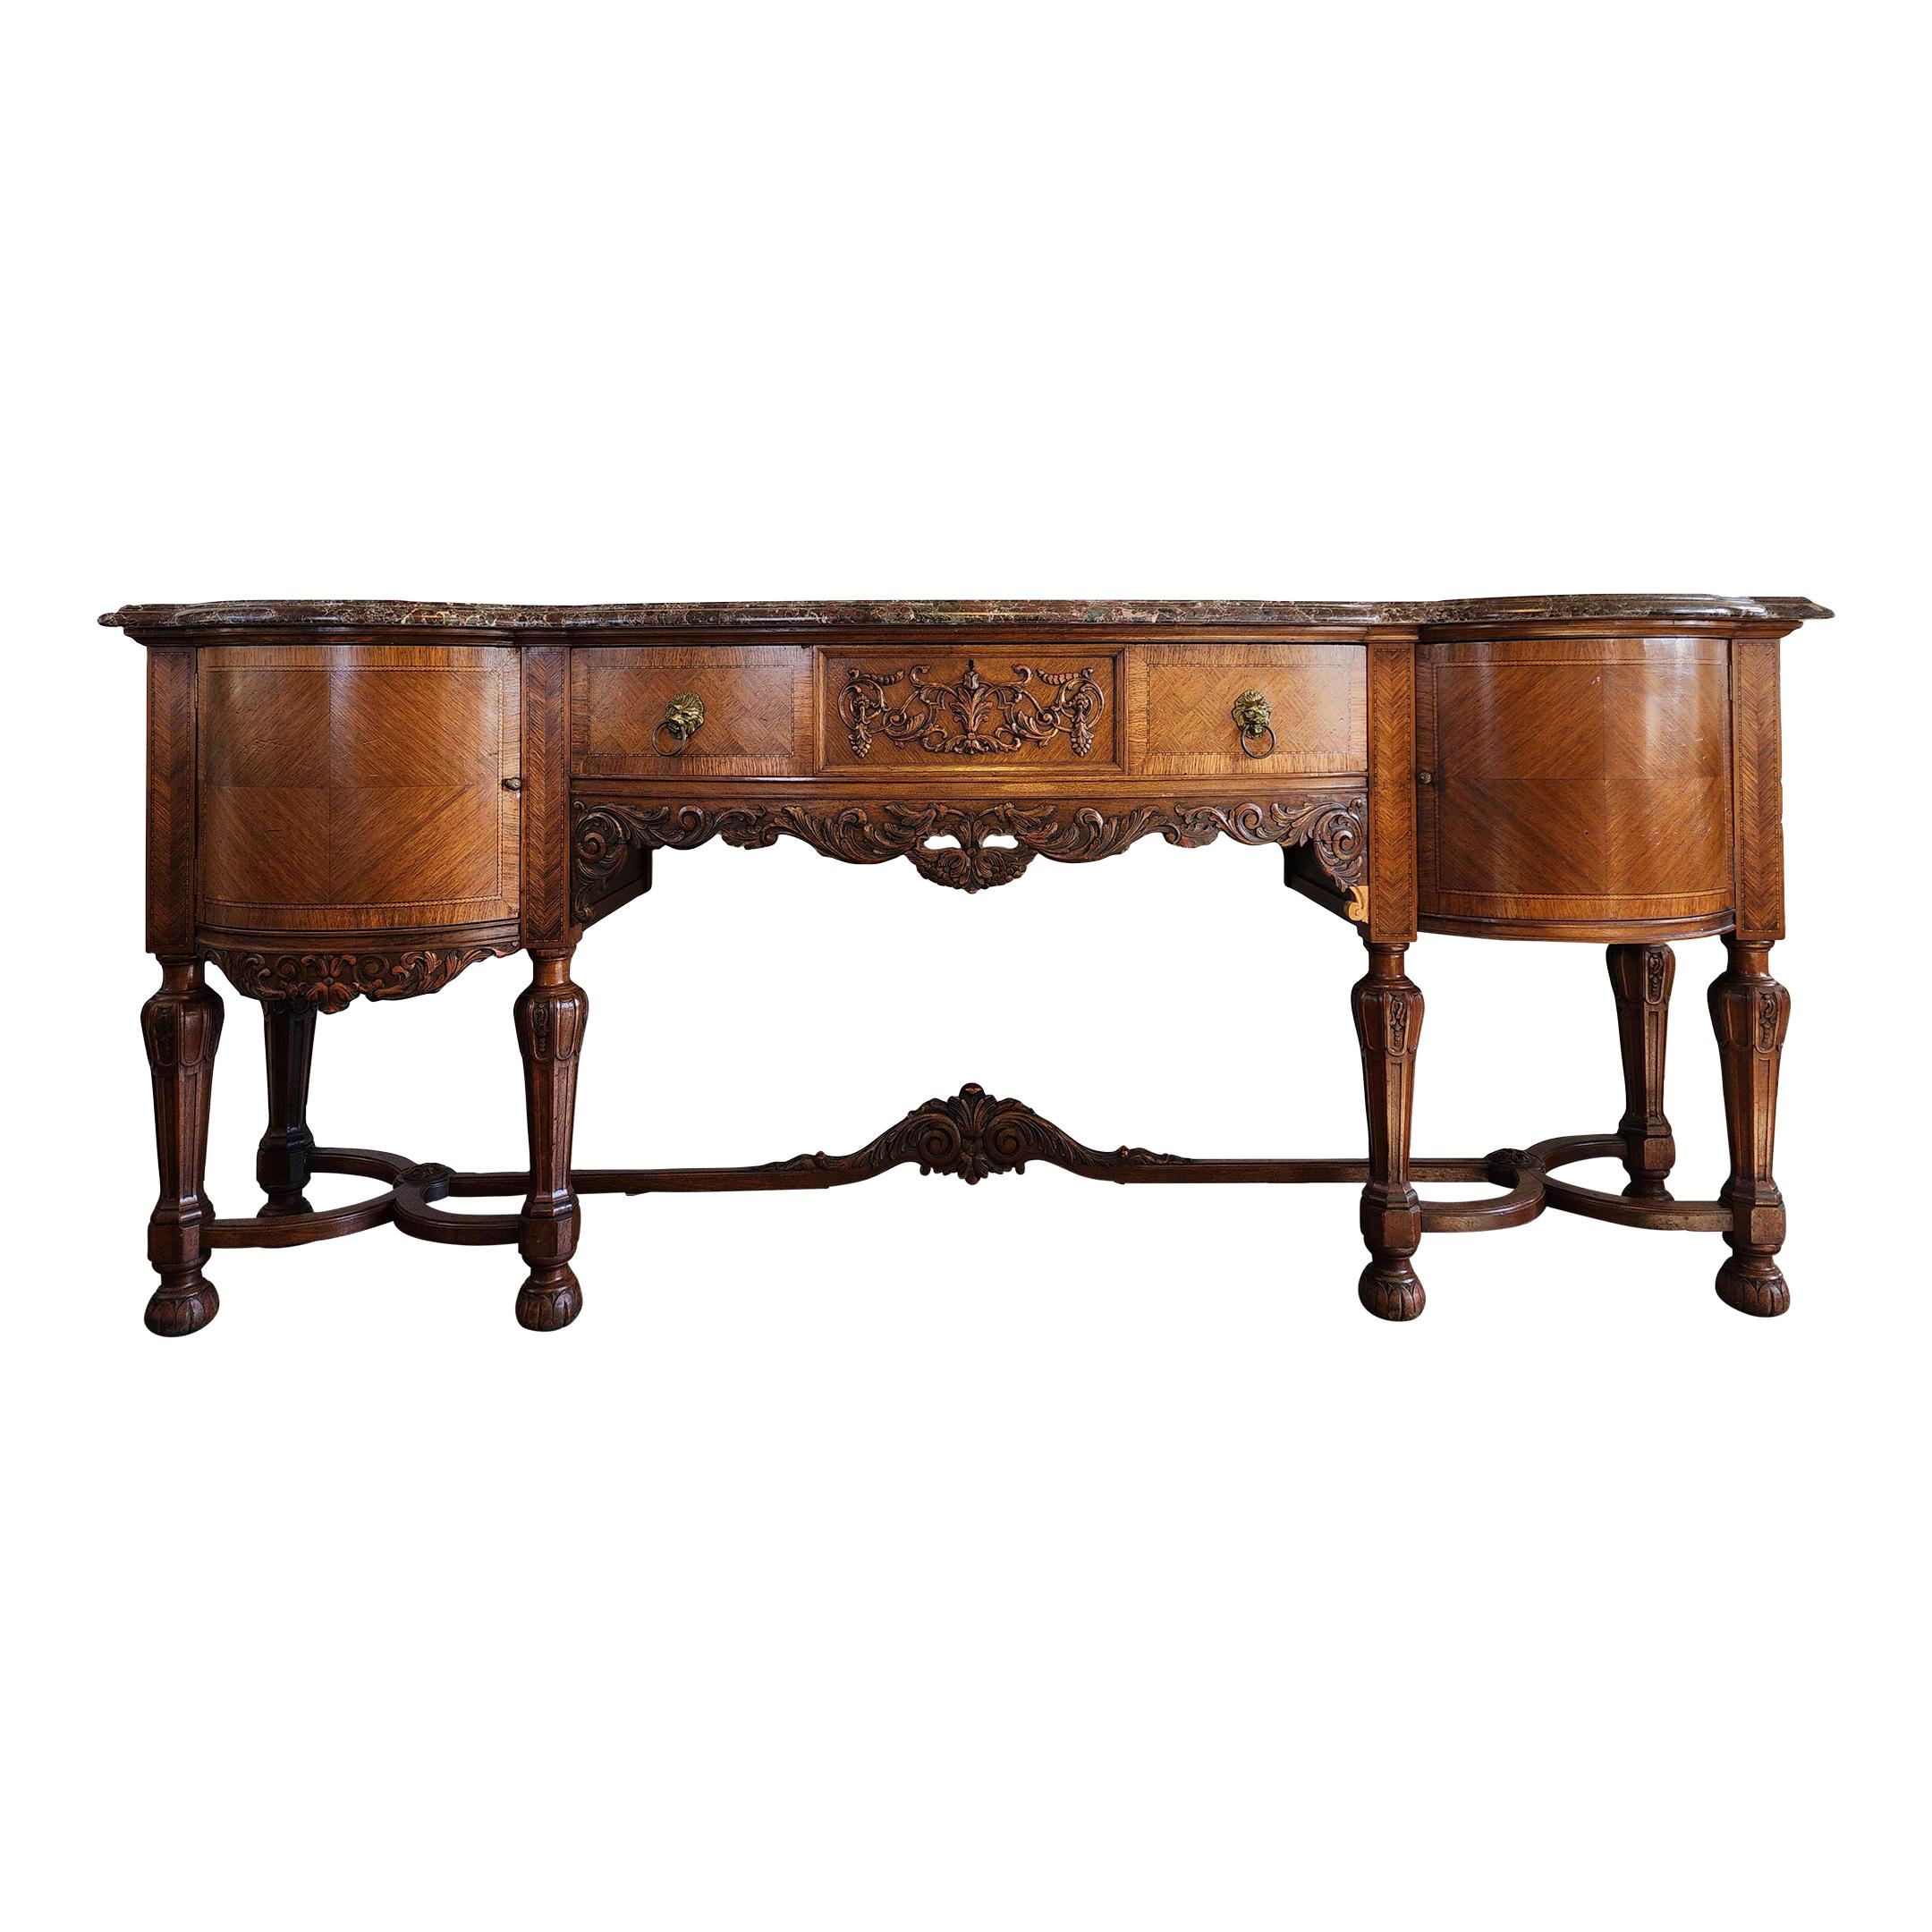 Early 20th Century Antique Carved Wood Louis XVI Neoclassical Sideboard For Sale 9